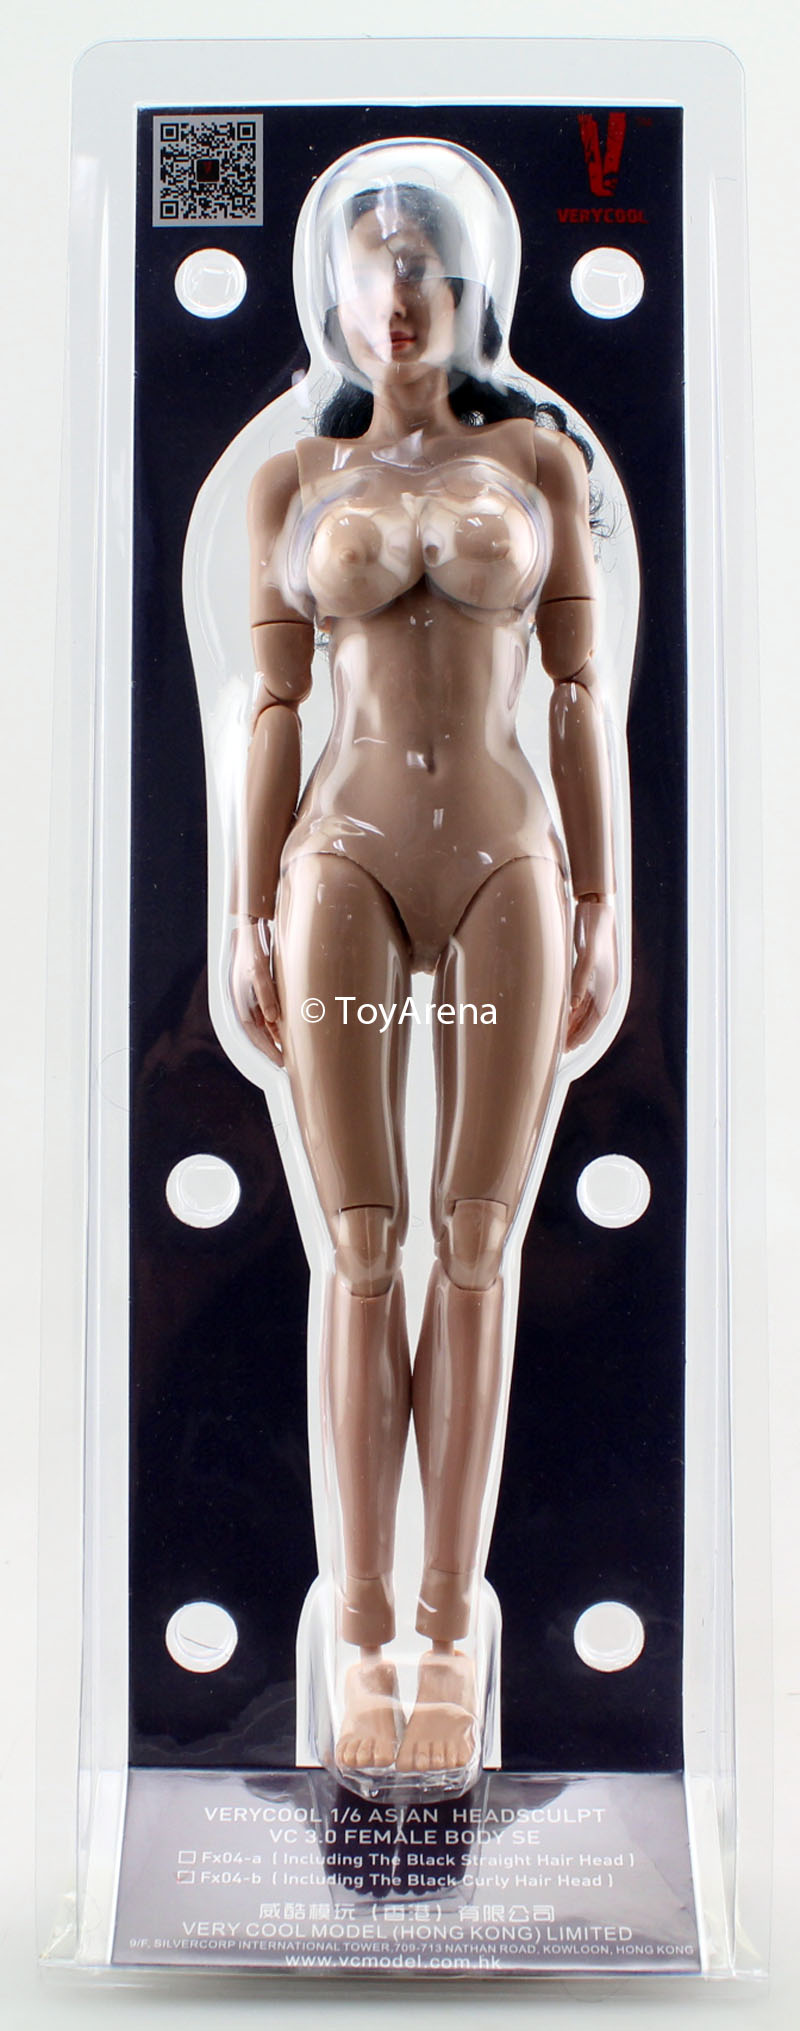 Very Cool 1/6 Scale FX04-B Asian Female Body 3.0 with Curly Hair Action Figure Set